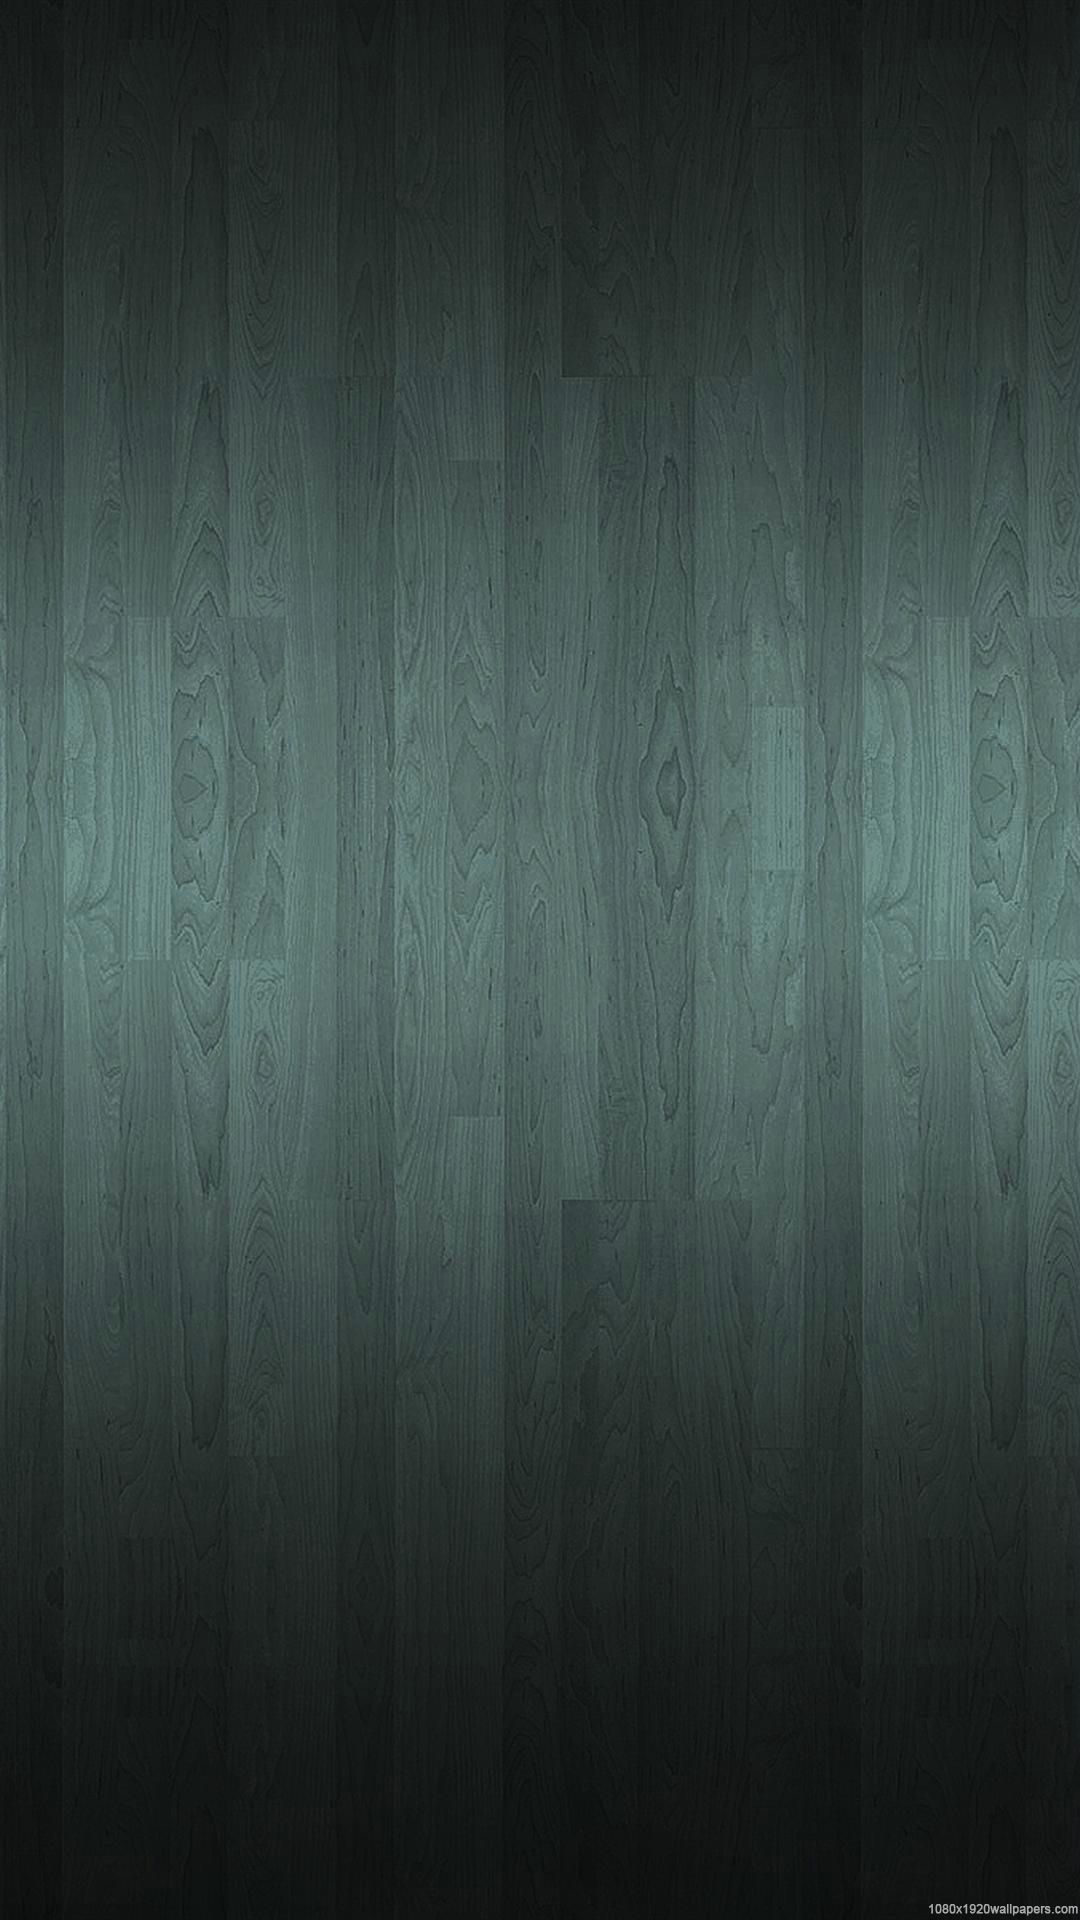 1080x1920 Textures Wood Wallpapers HD